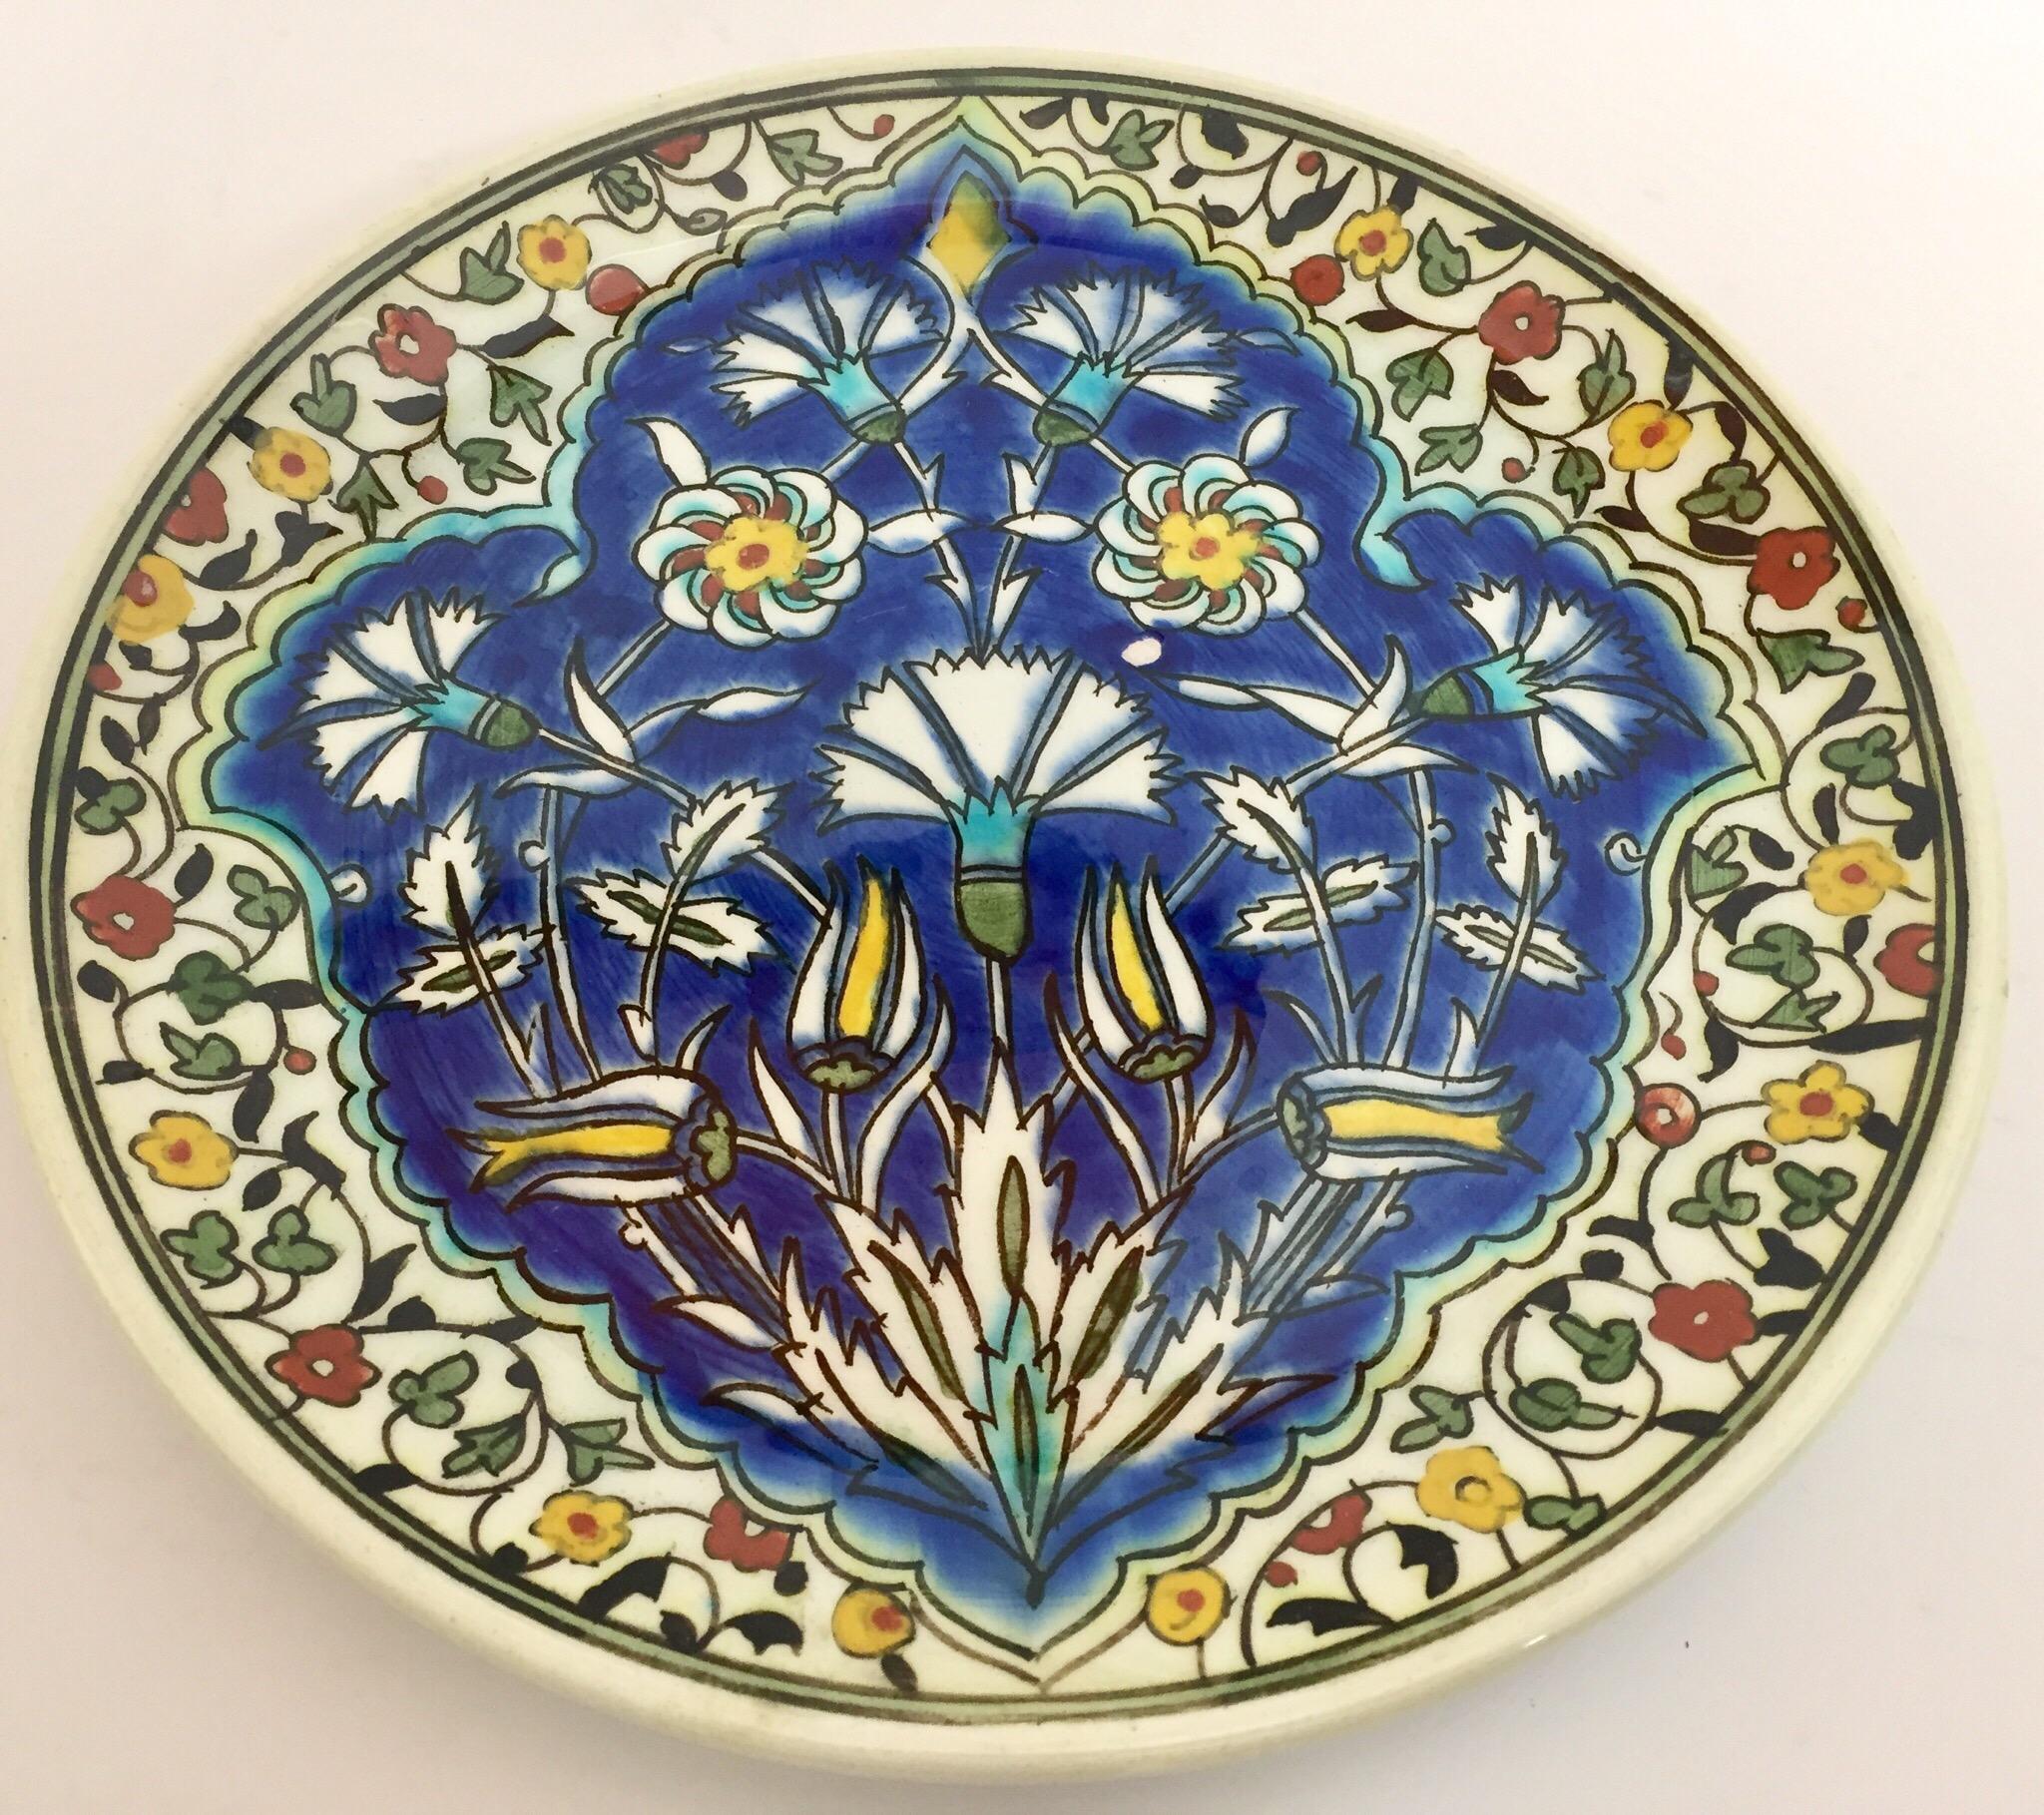 Islamic Polychrome Hand Painted Ceramic Decorative Plate with Moorish Floral Design For Sale